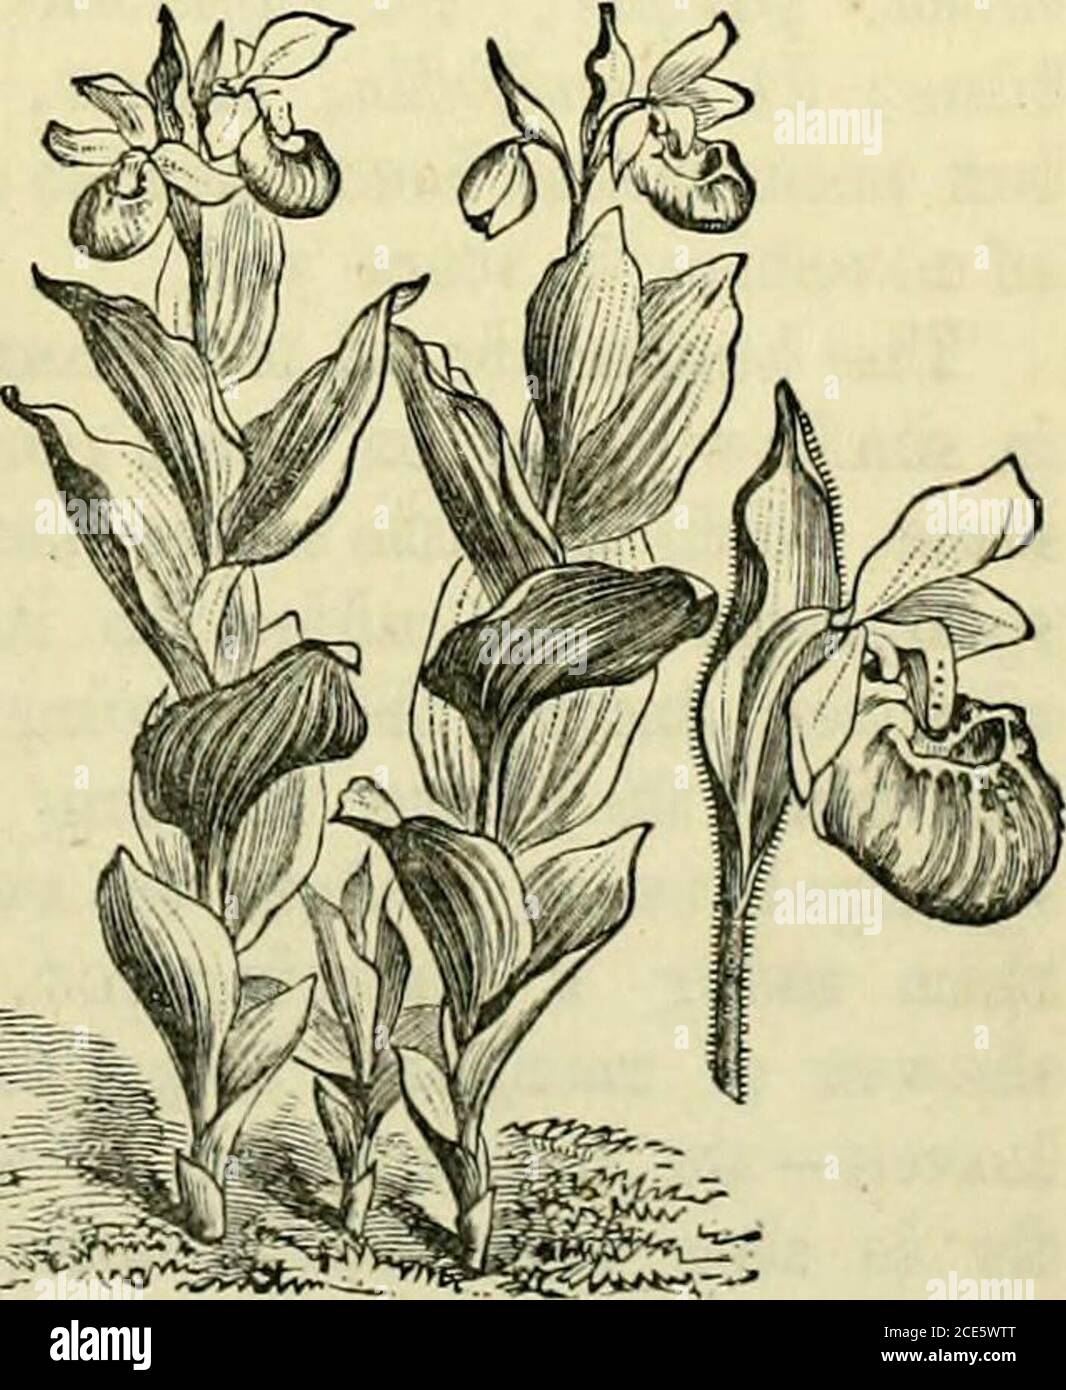 . The orchid-grower's manual : containing descriptions of the best species and varieties of orchidaceous plants . Swartz.—One of the finest and most distinct of the terrestrial section. It grows about teninches high, has oblong acute leaves, and produces its charm-ing large purple flowers early in June. Fig.—Bot. Mag., t.Bot. Ren., t. 1534.—Siberia ; Altai. Cypripedium parviflorum, Salisb.—A handsome fragrantspecies, somewhat resembling C. Calceolus, but taller; thestem and oval acuminate leaves are slightly downy, the sepalsand petals a little twisted, yellow streaked with reddishbrown, the l Stock Photo